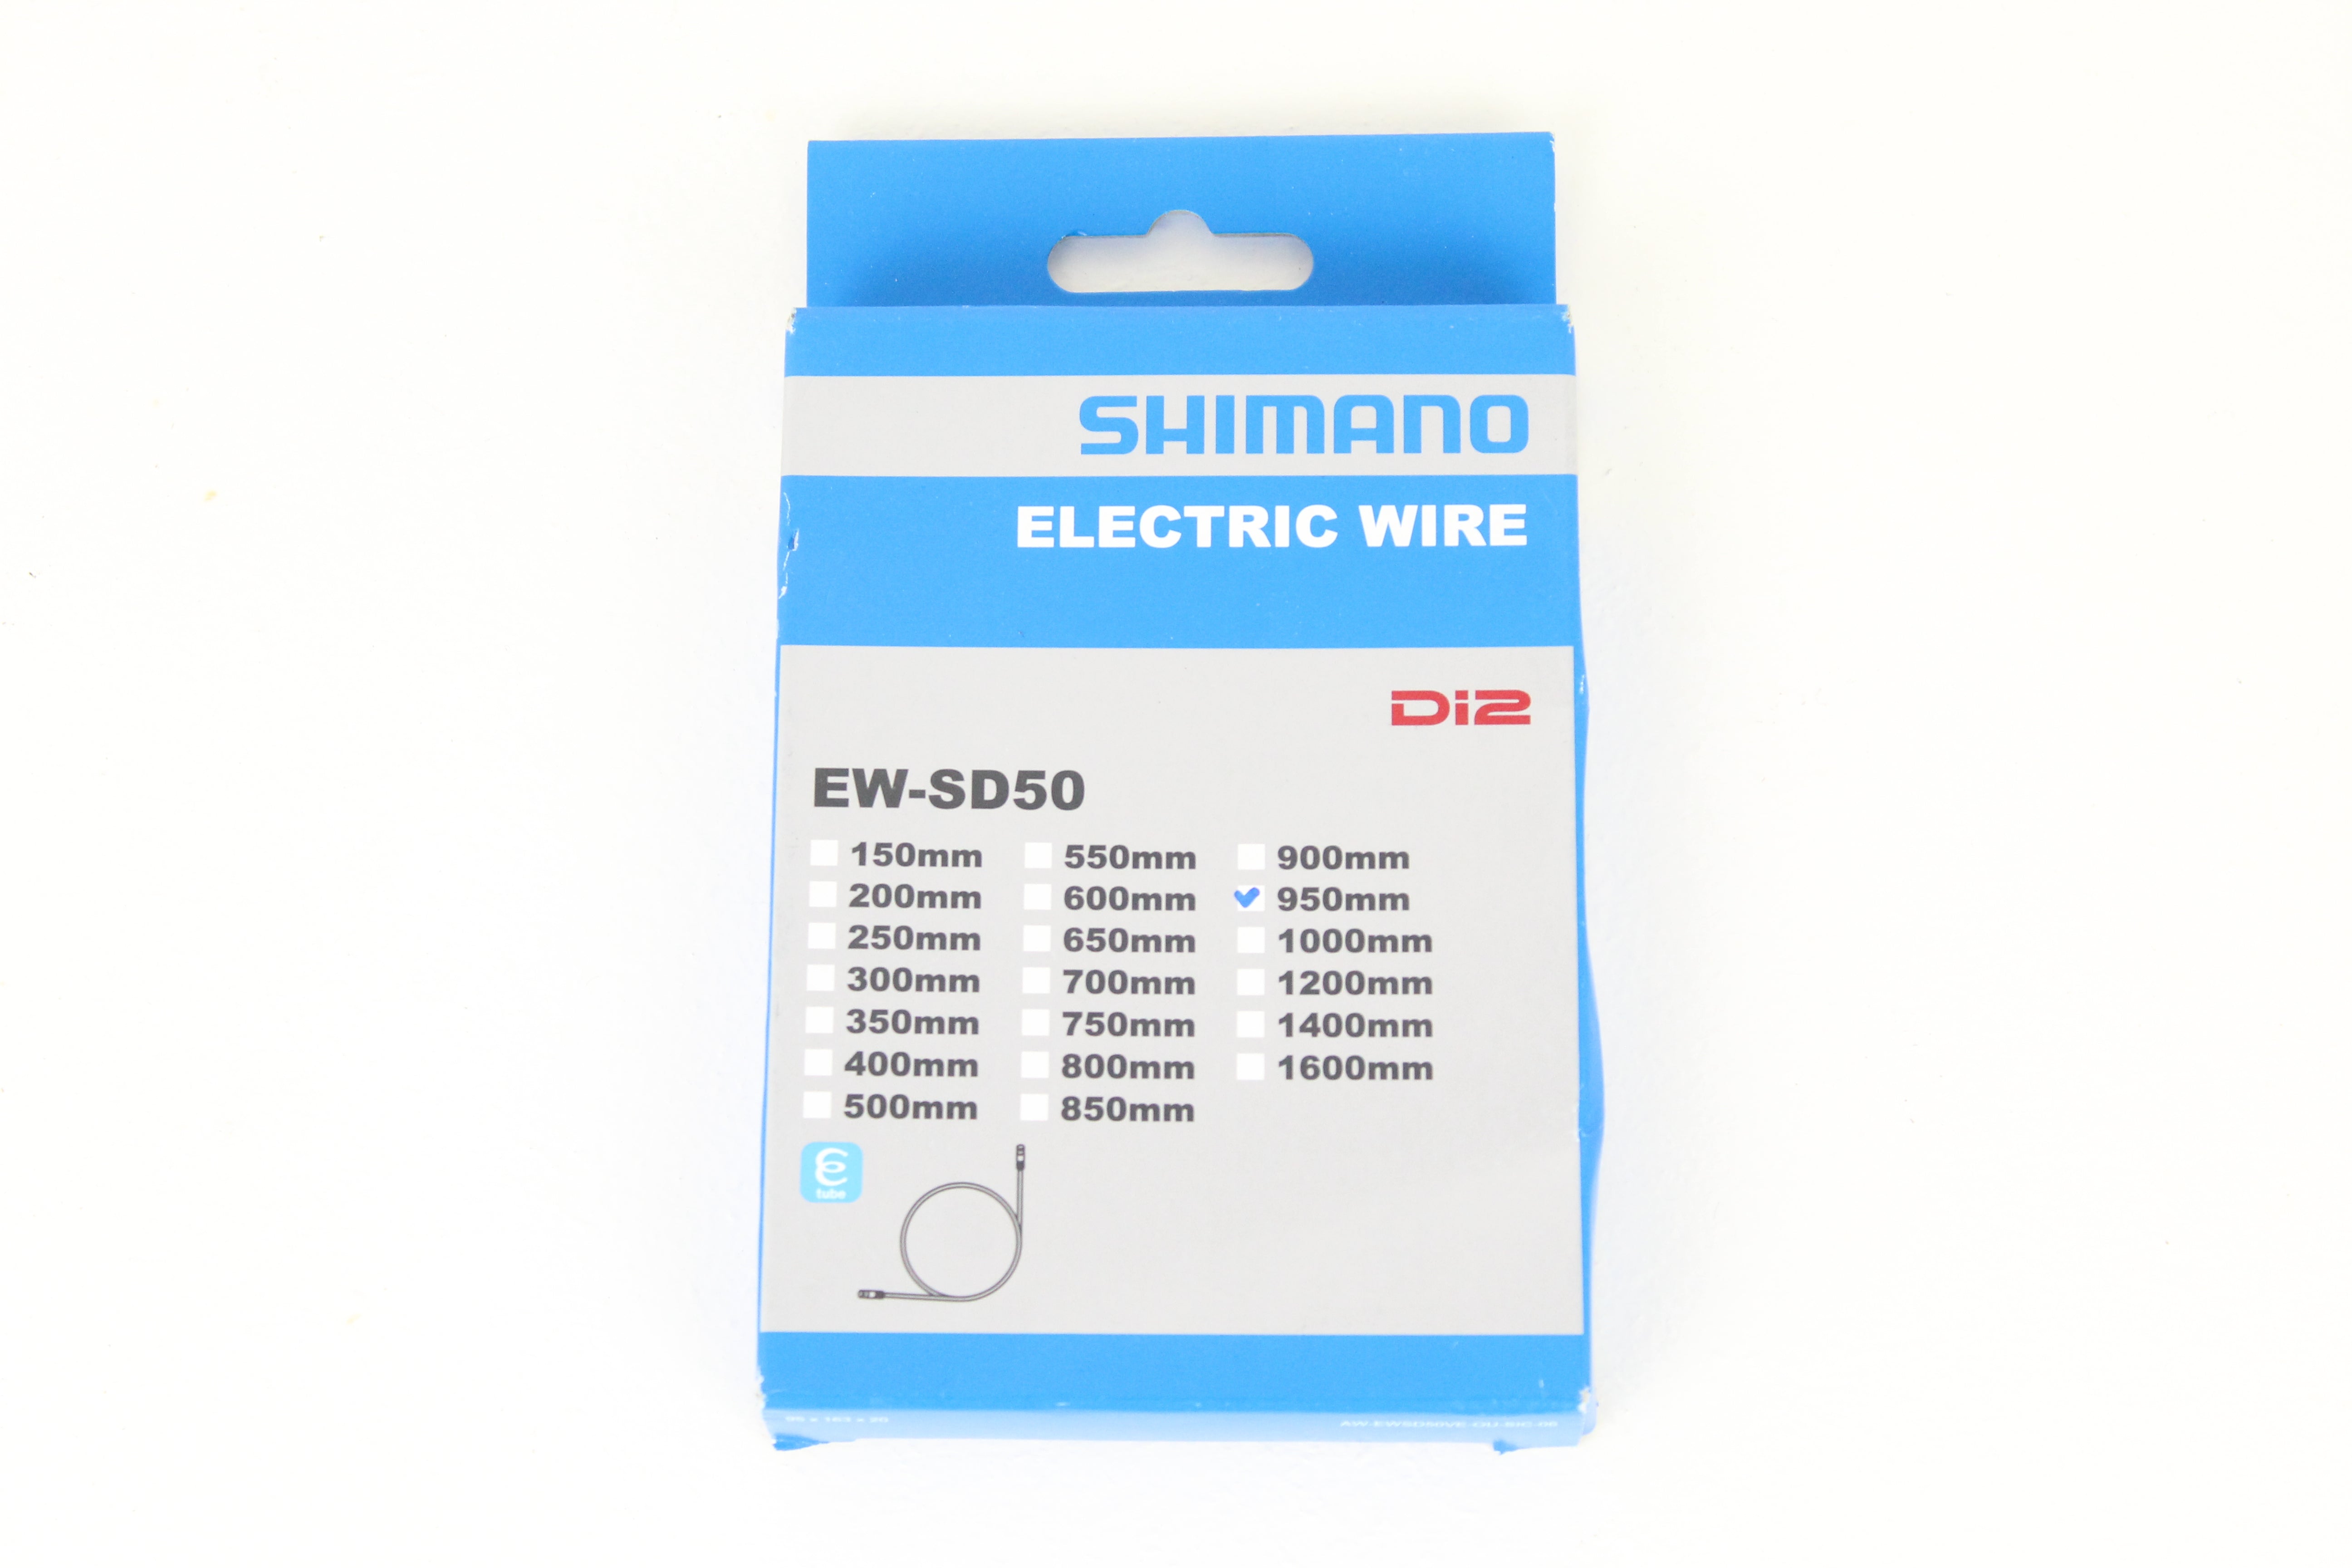 Di2 Electric Wire- Shimano EW-SD50 (Different Lengths)- NEW